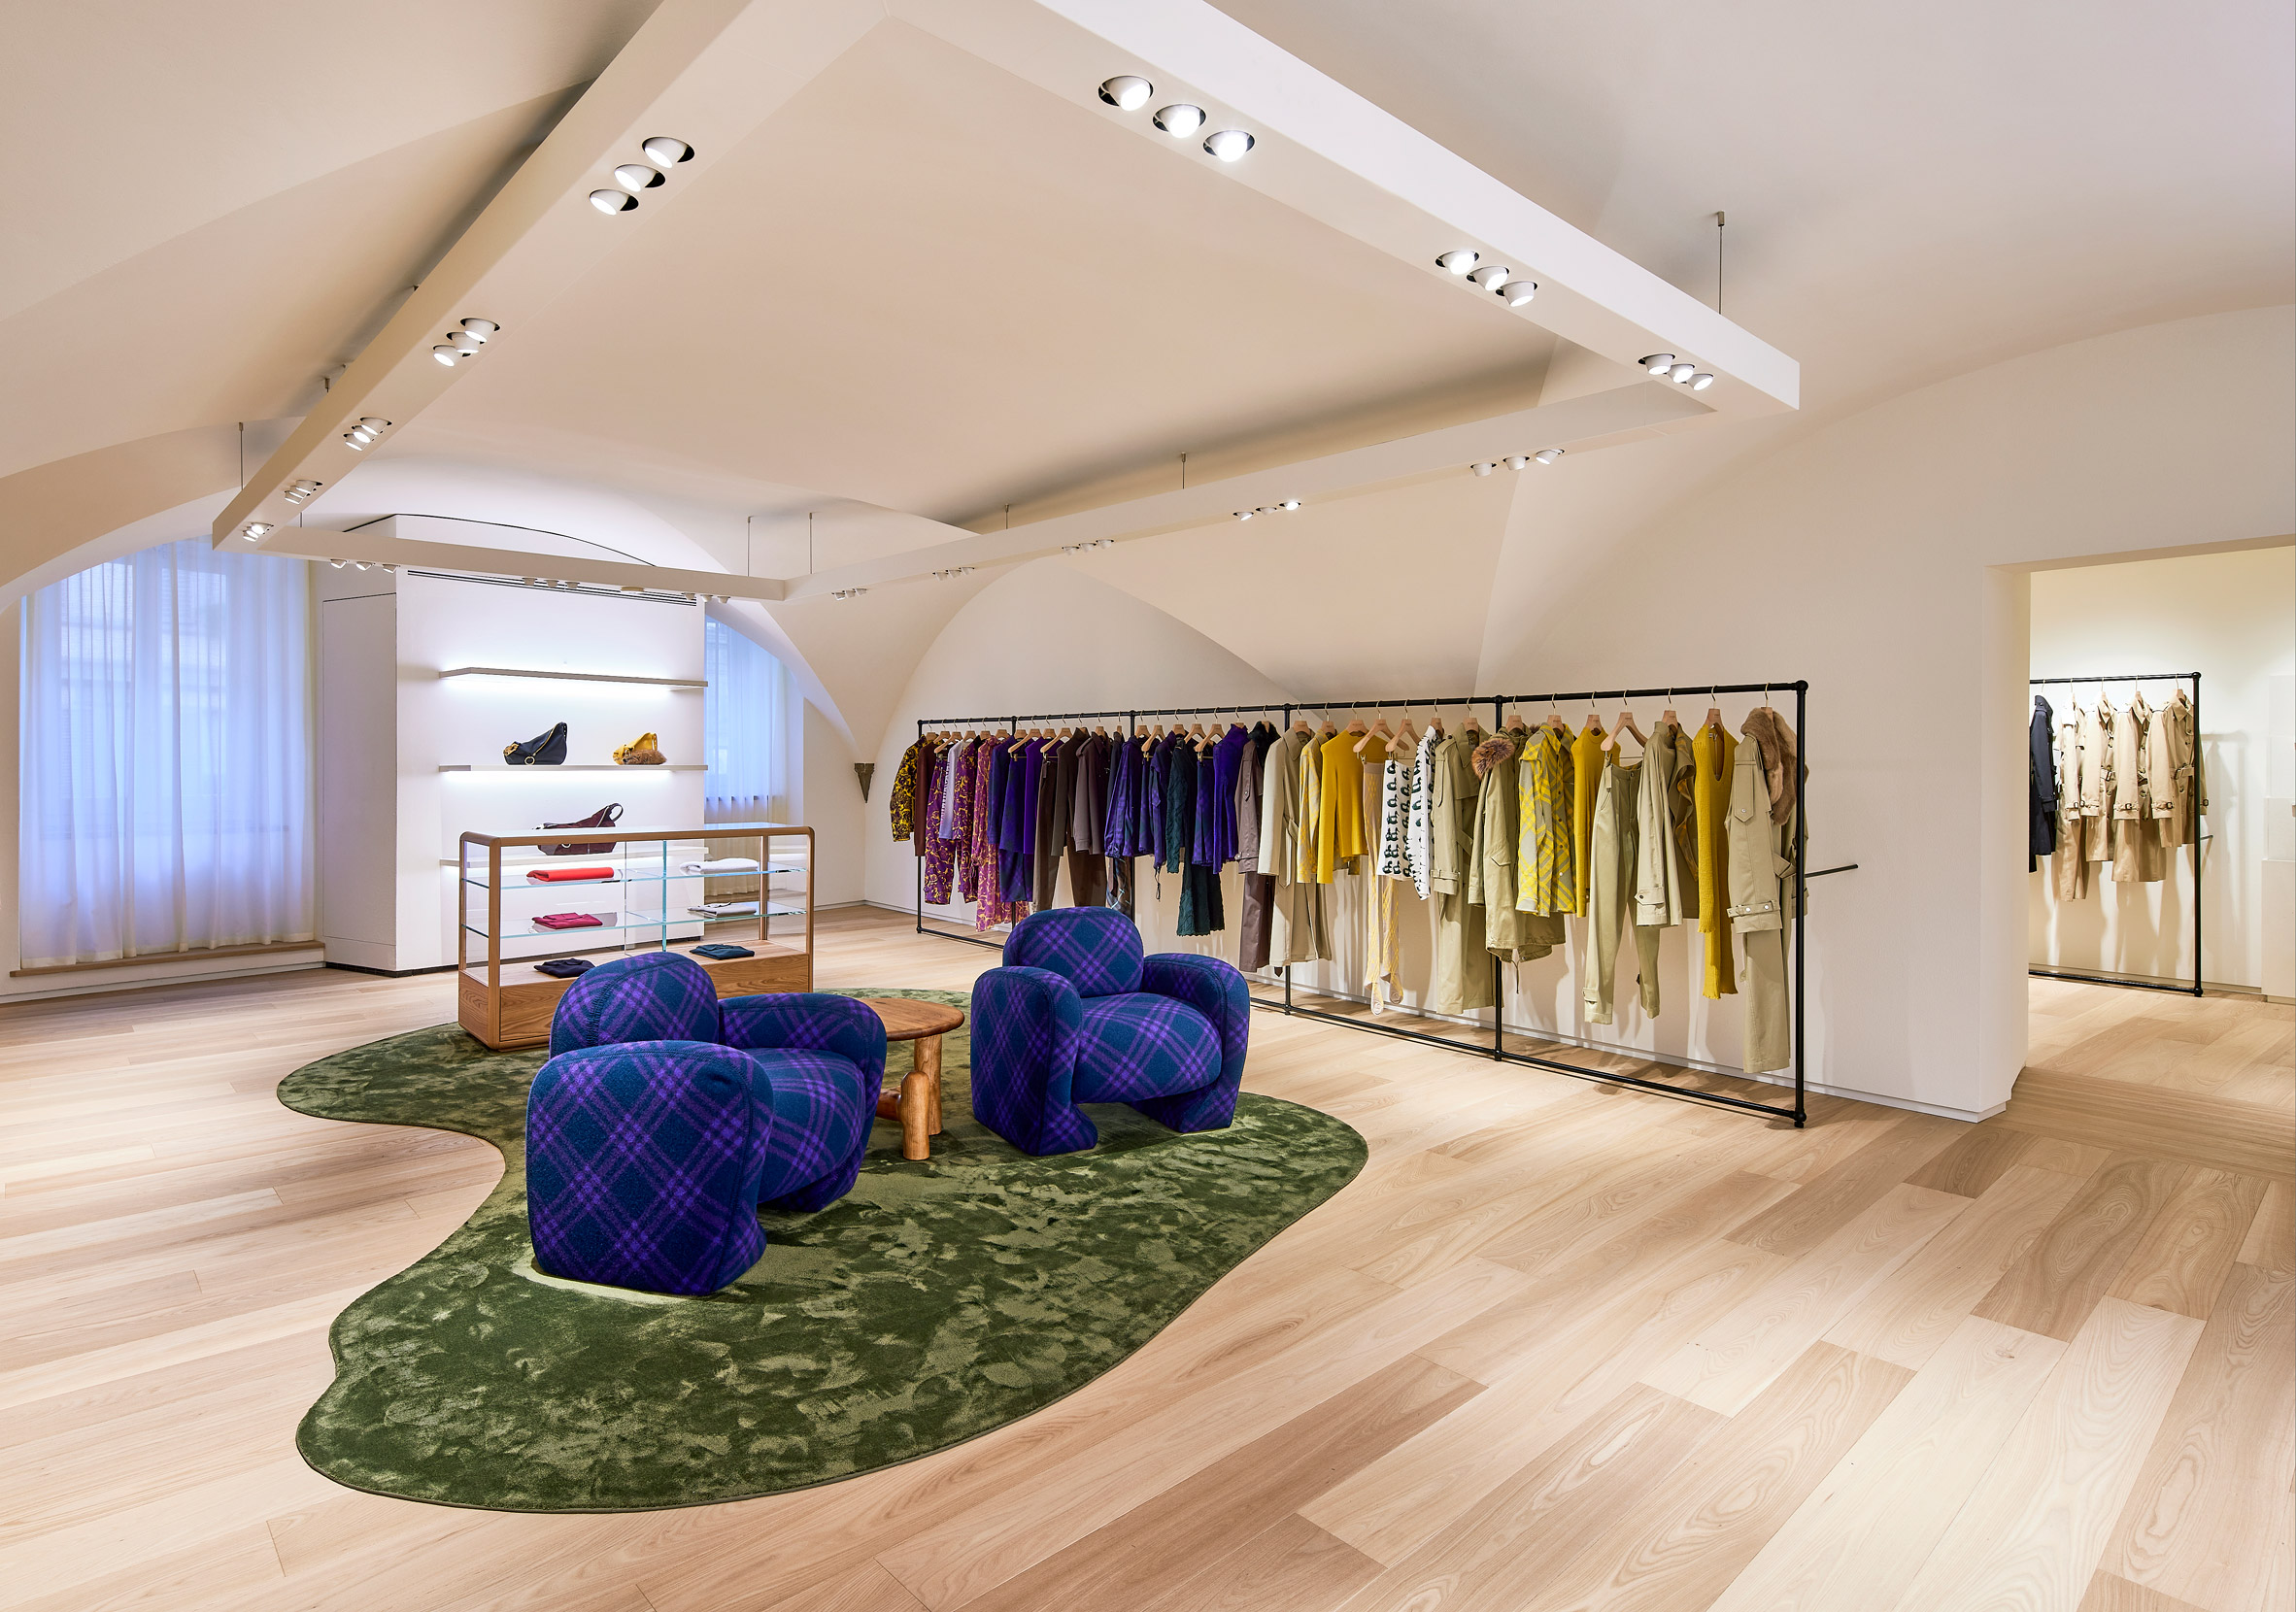 Photograph of interior of Burberry store